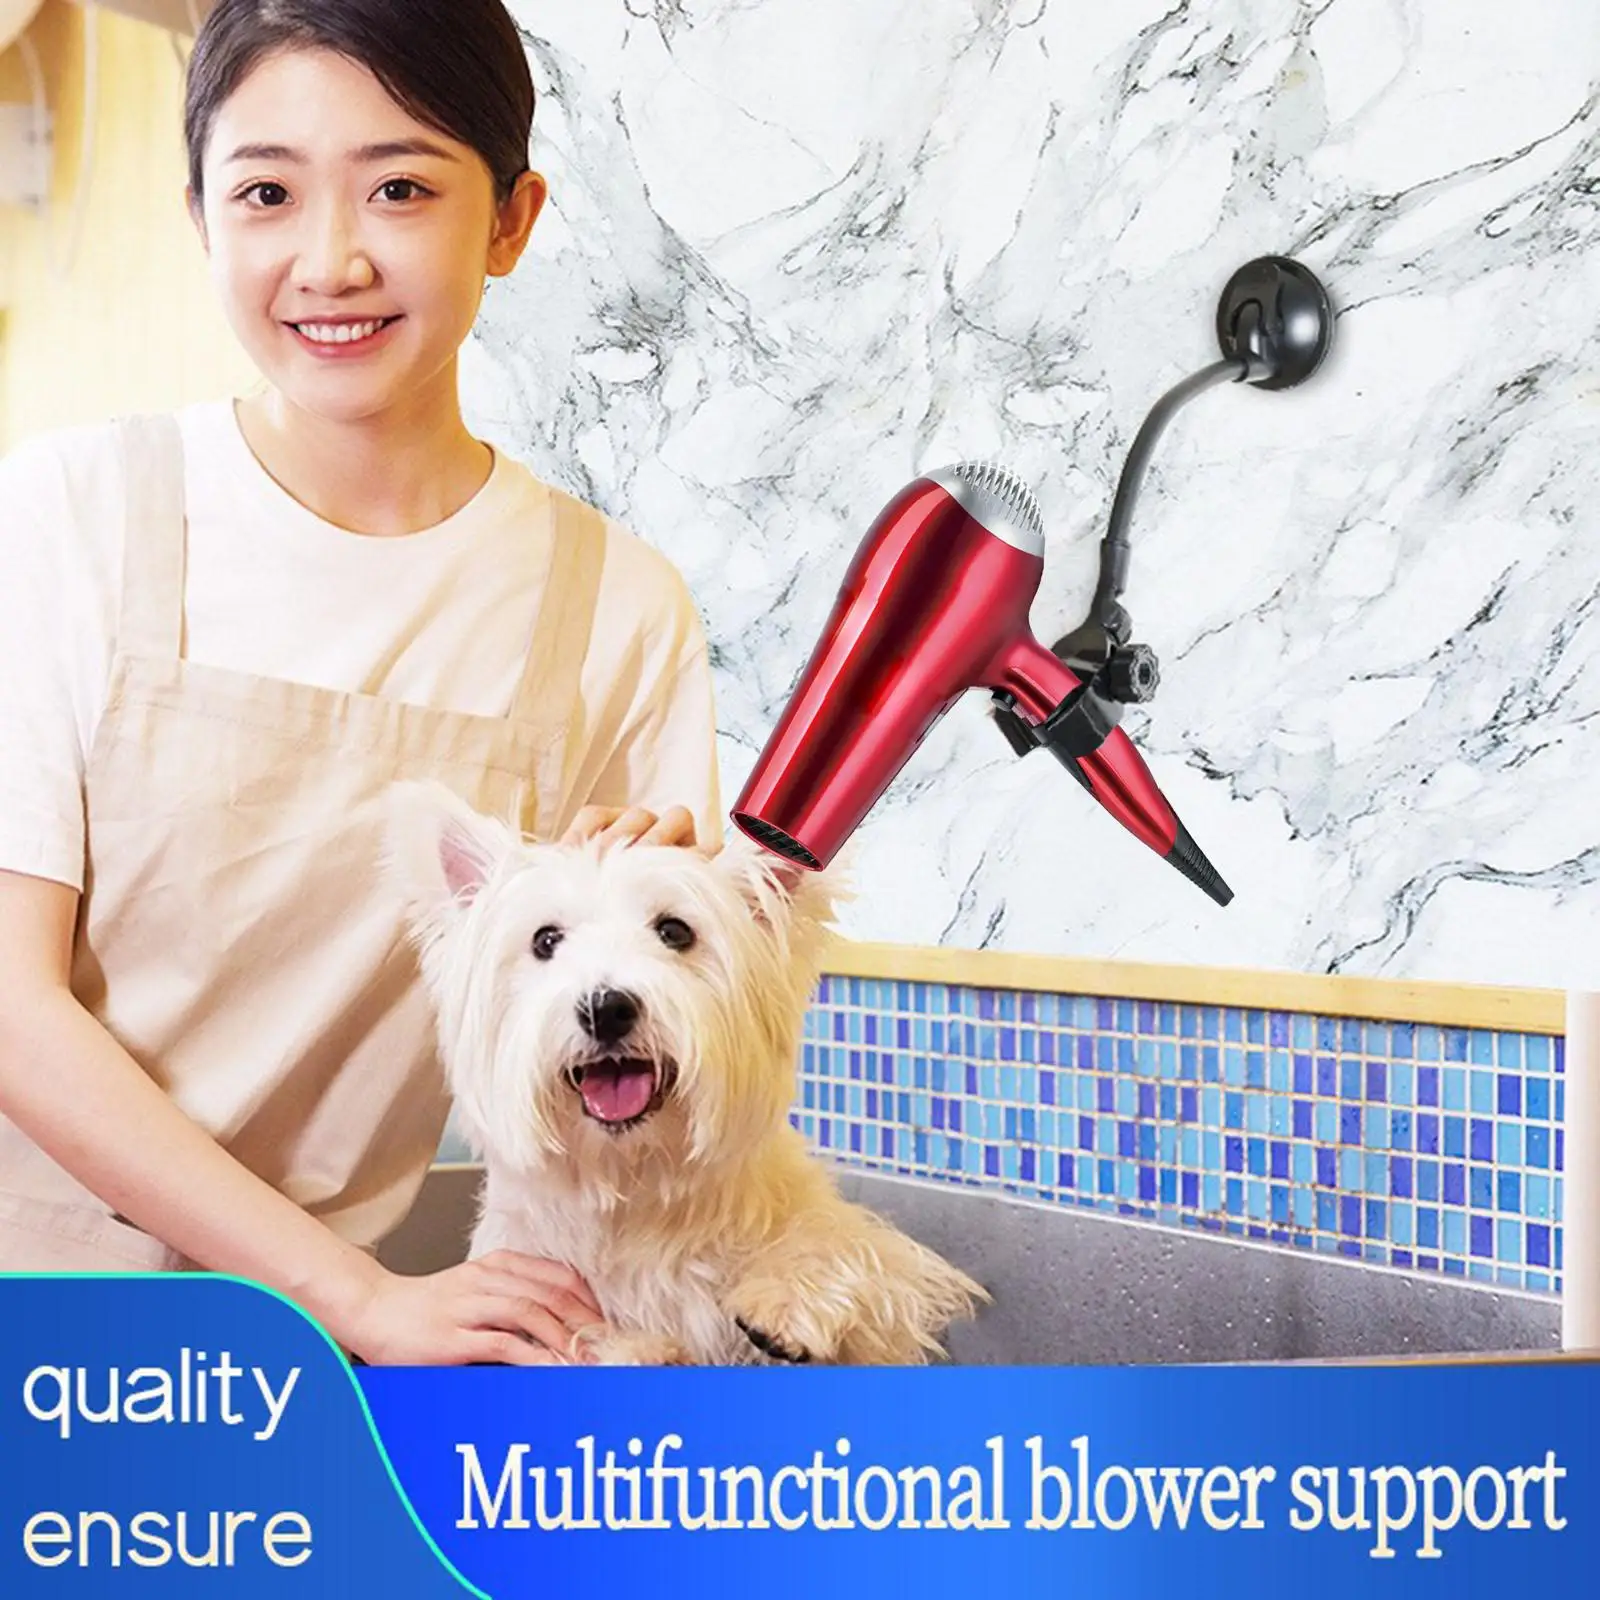 Hair Dryer Holder Suction Cup Blow Dryer Stand for Dog Cat Grooming Washroom